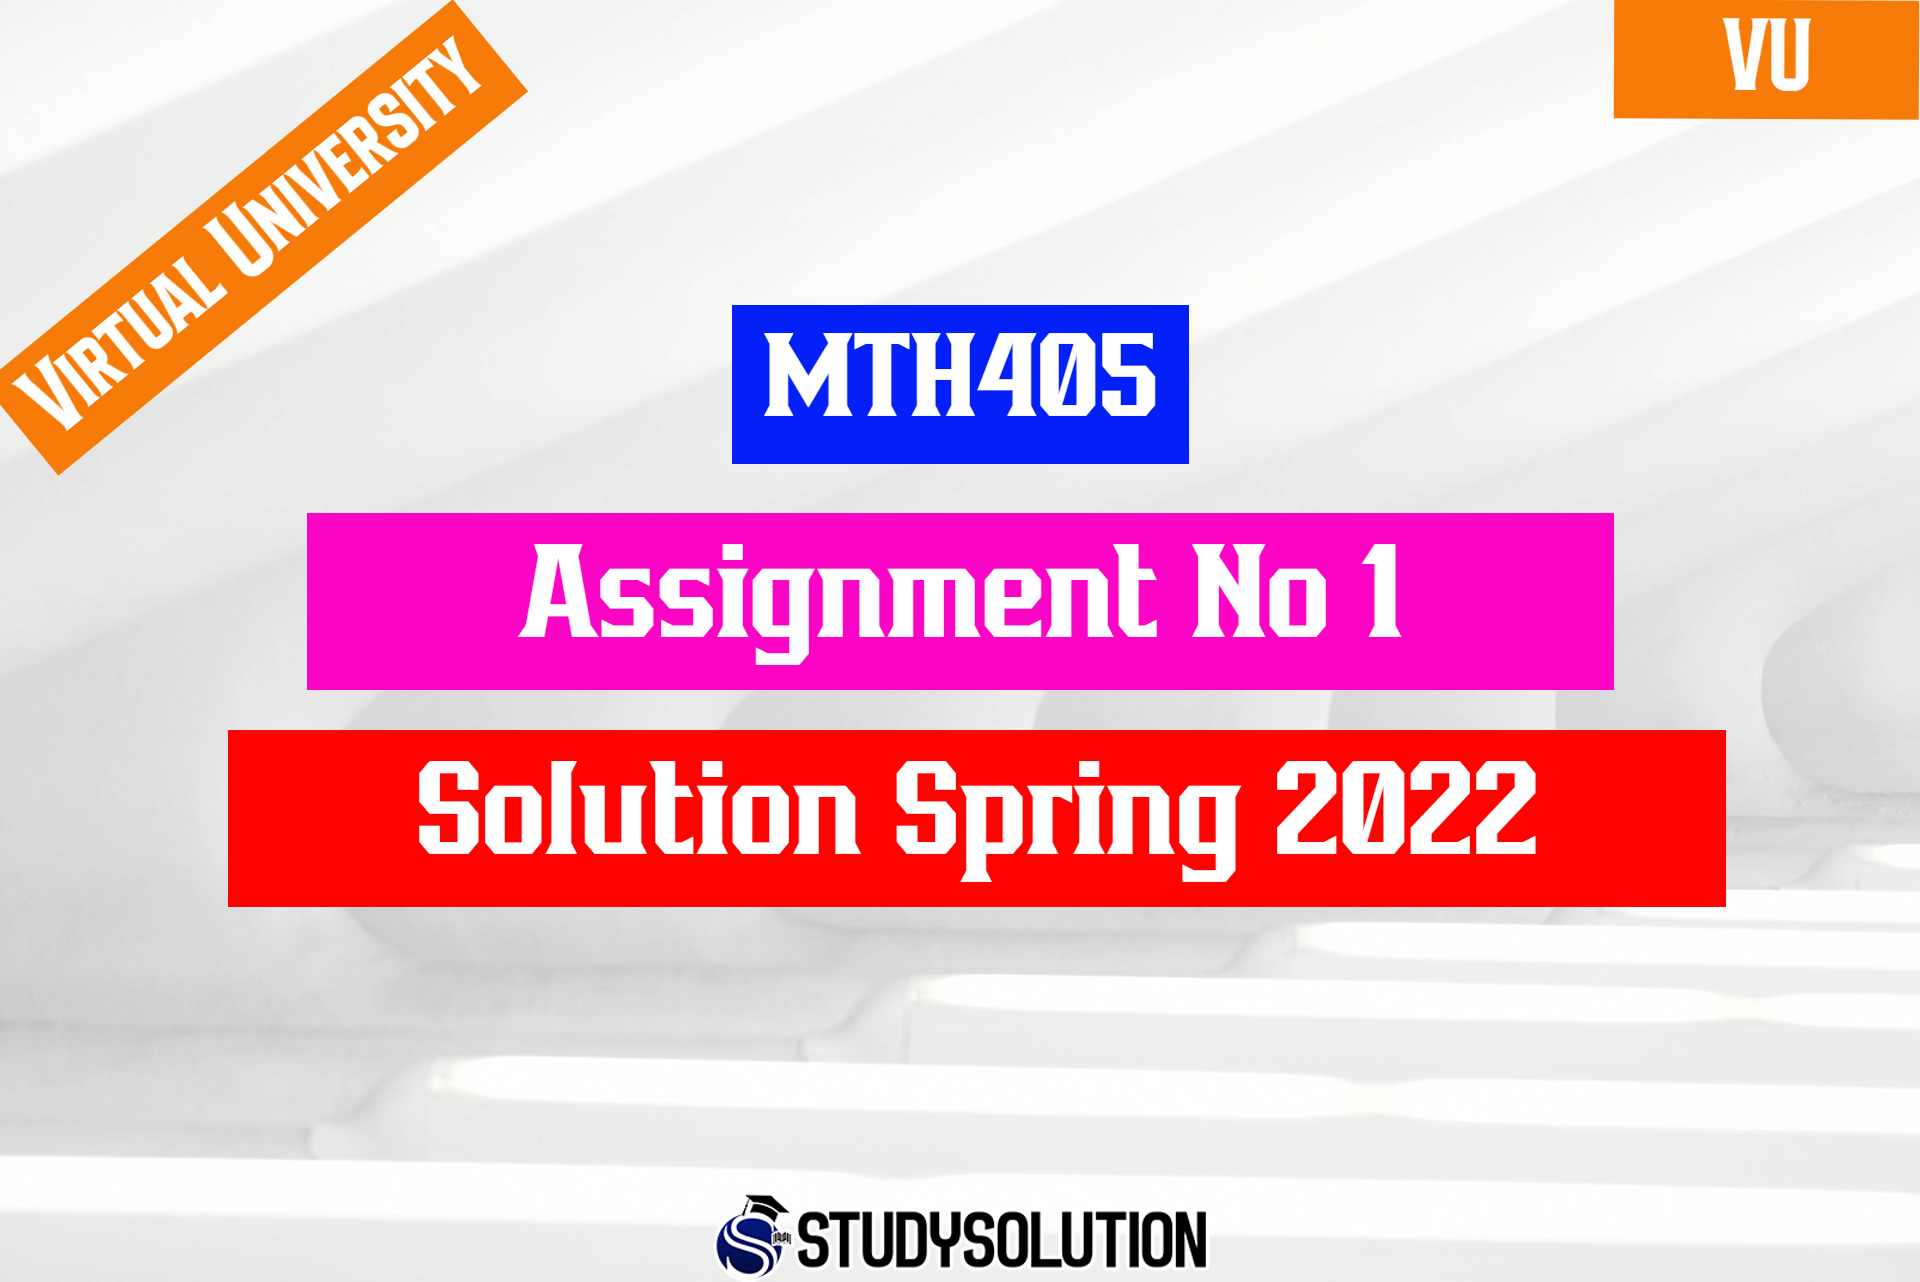 MTH405 Assignment No 1 Solution Spring 2022